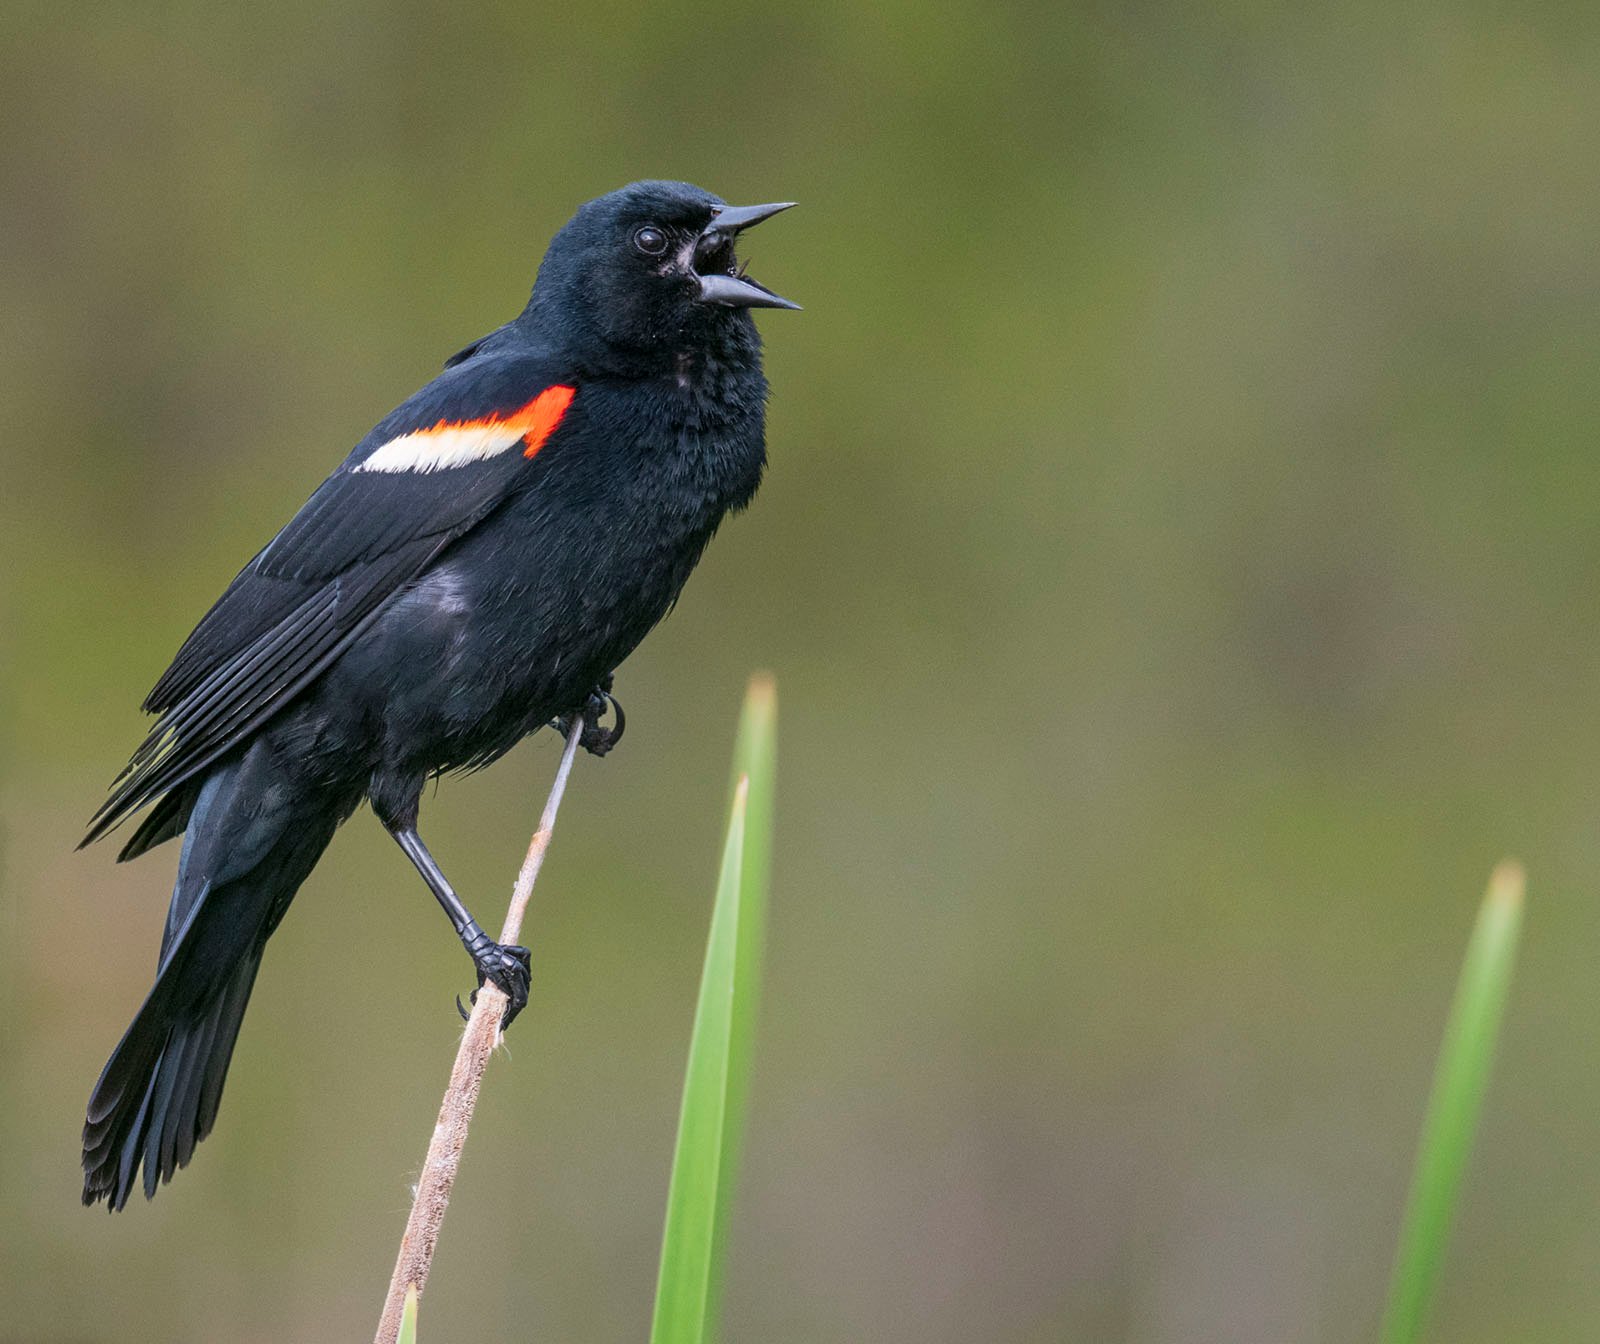 A black bird with a red and yellow patch on its wing perches on a thin reed, with its beak open as if singing. The background is blurred, consisting of green foliage.